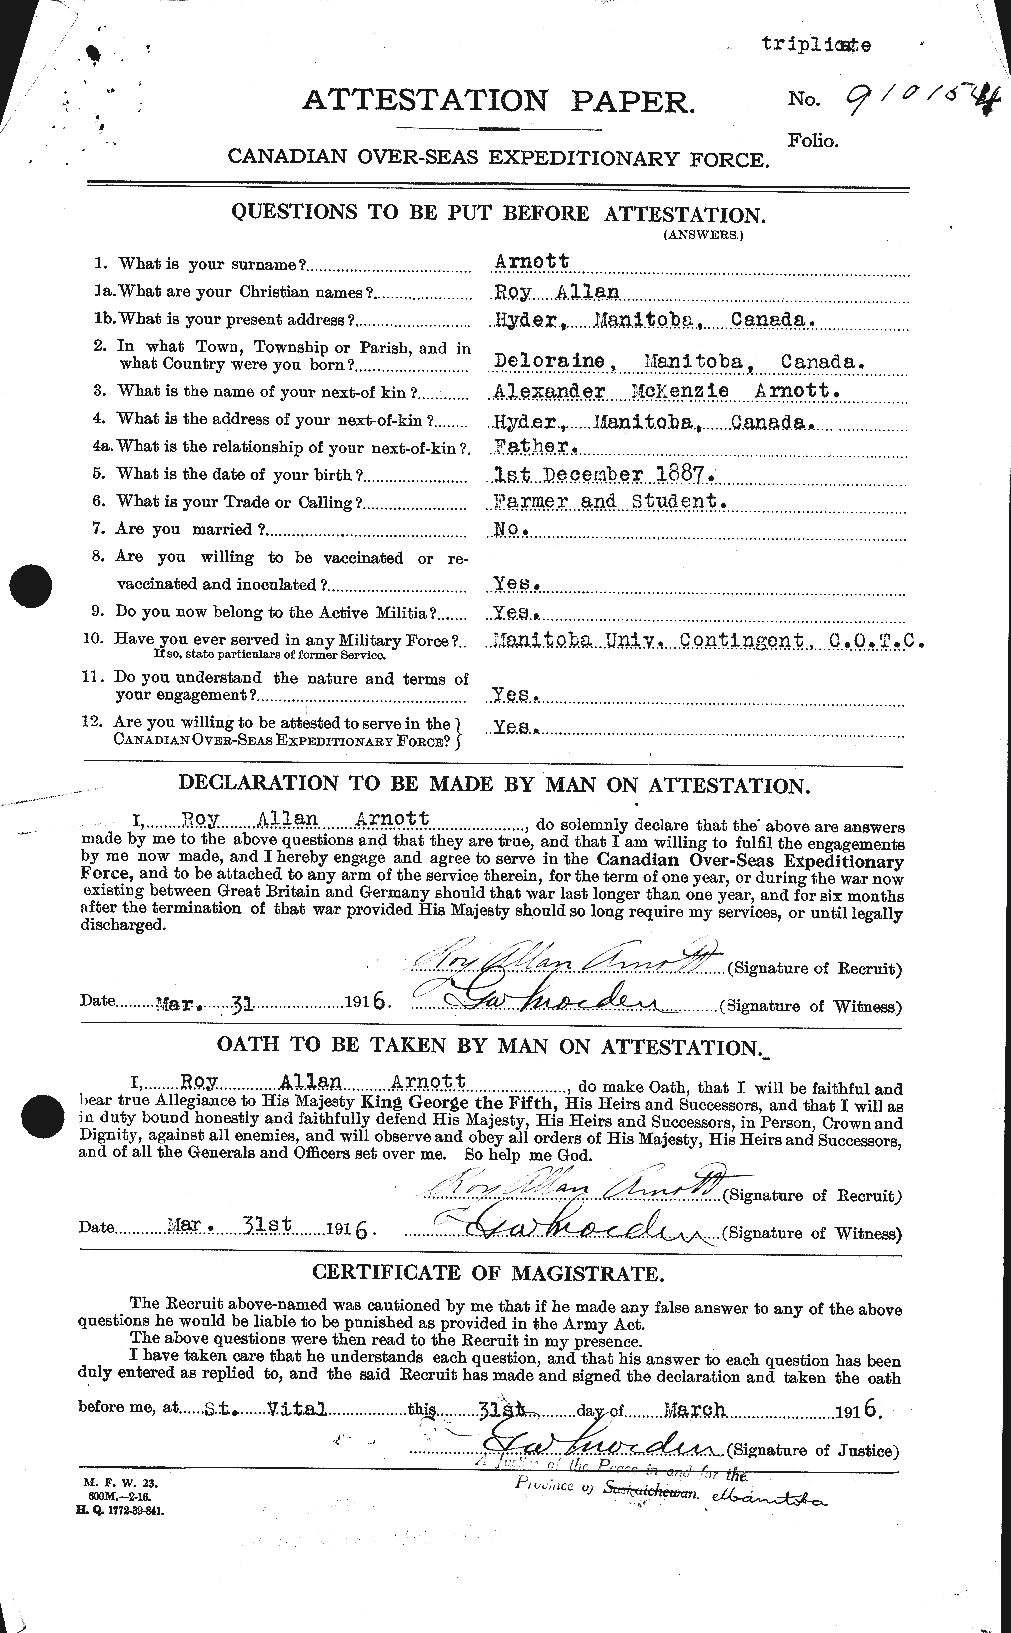 Personnel Records of the First World War - CEF 214364a